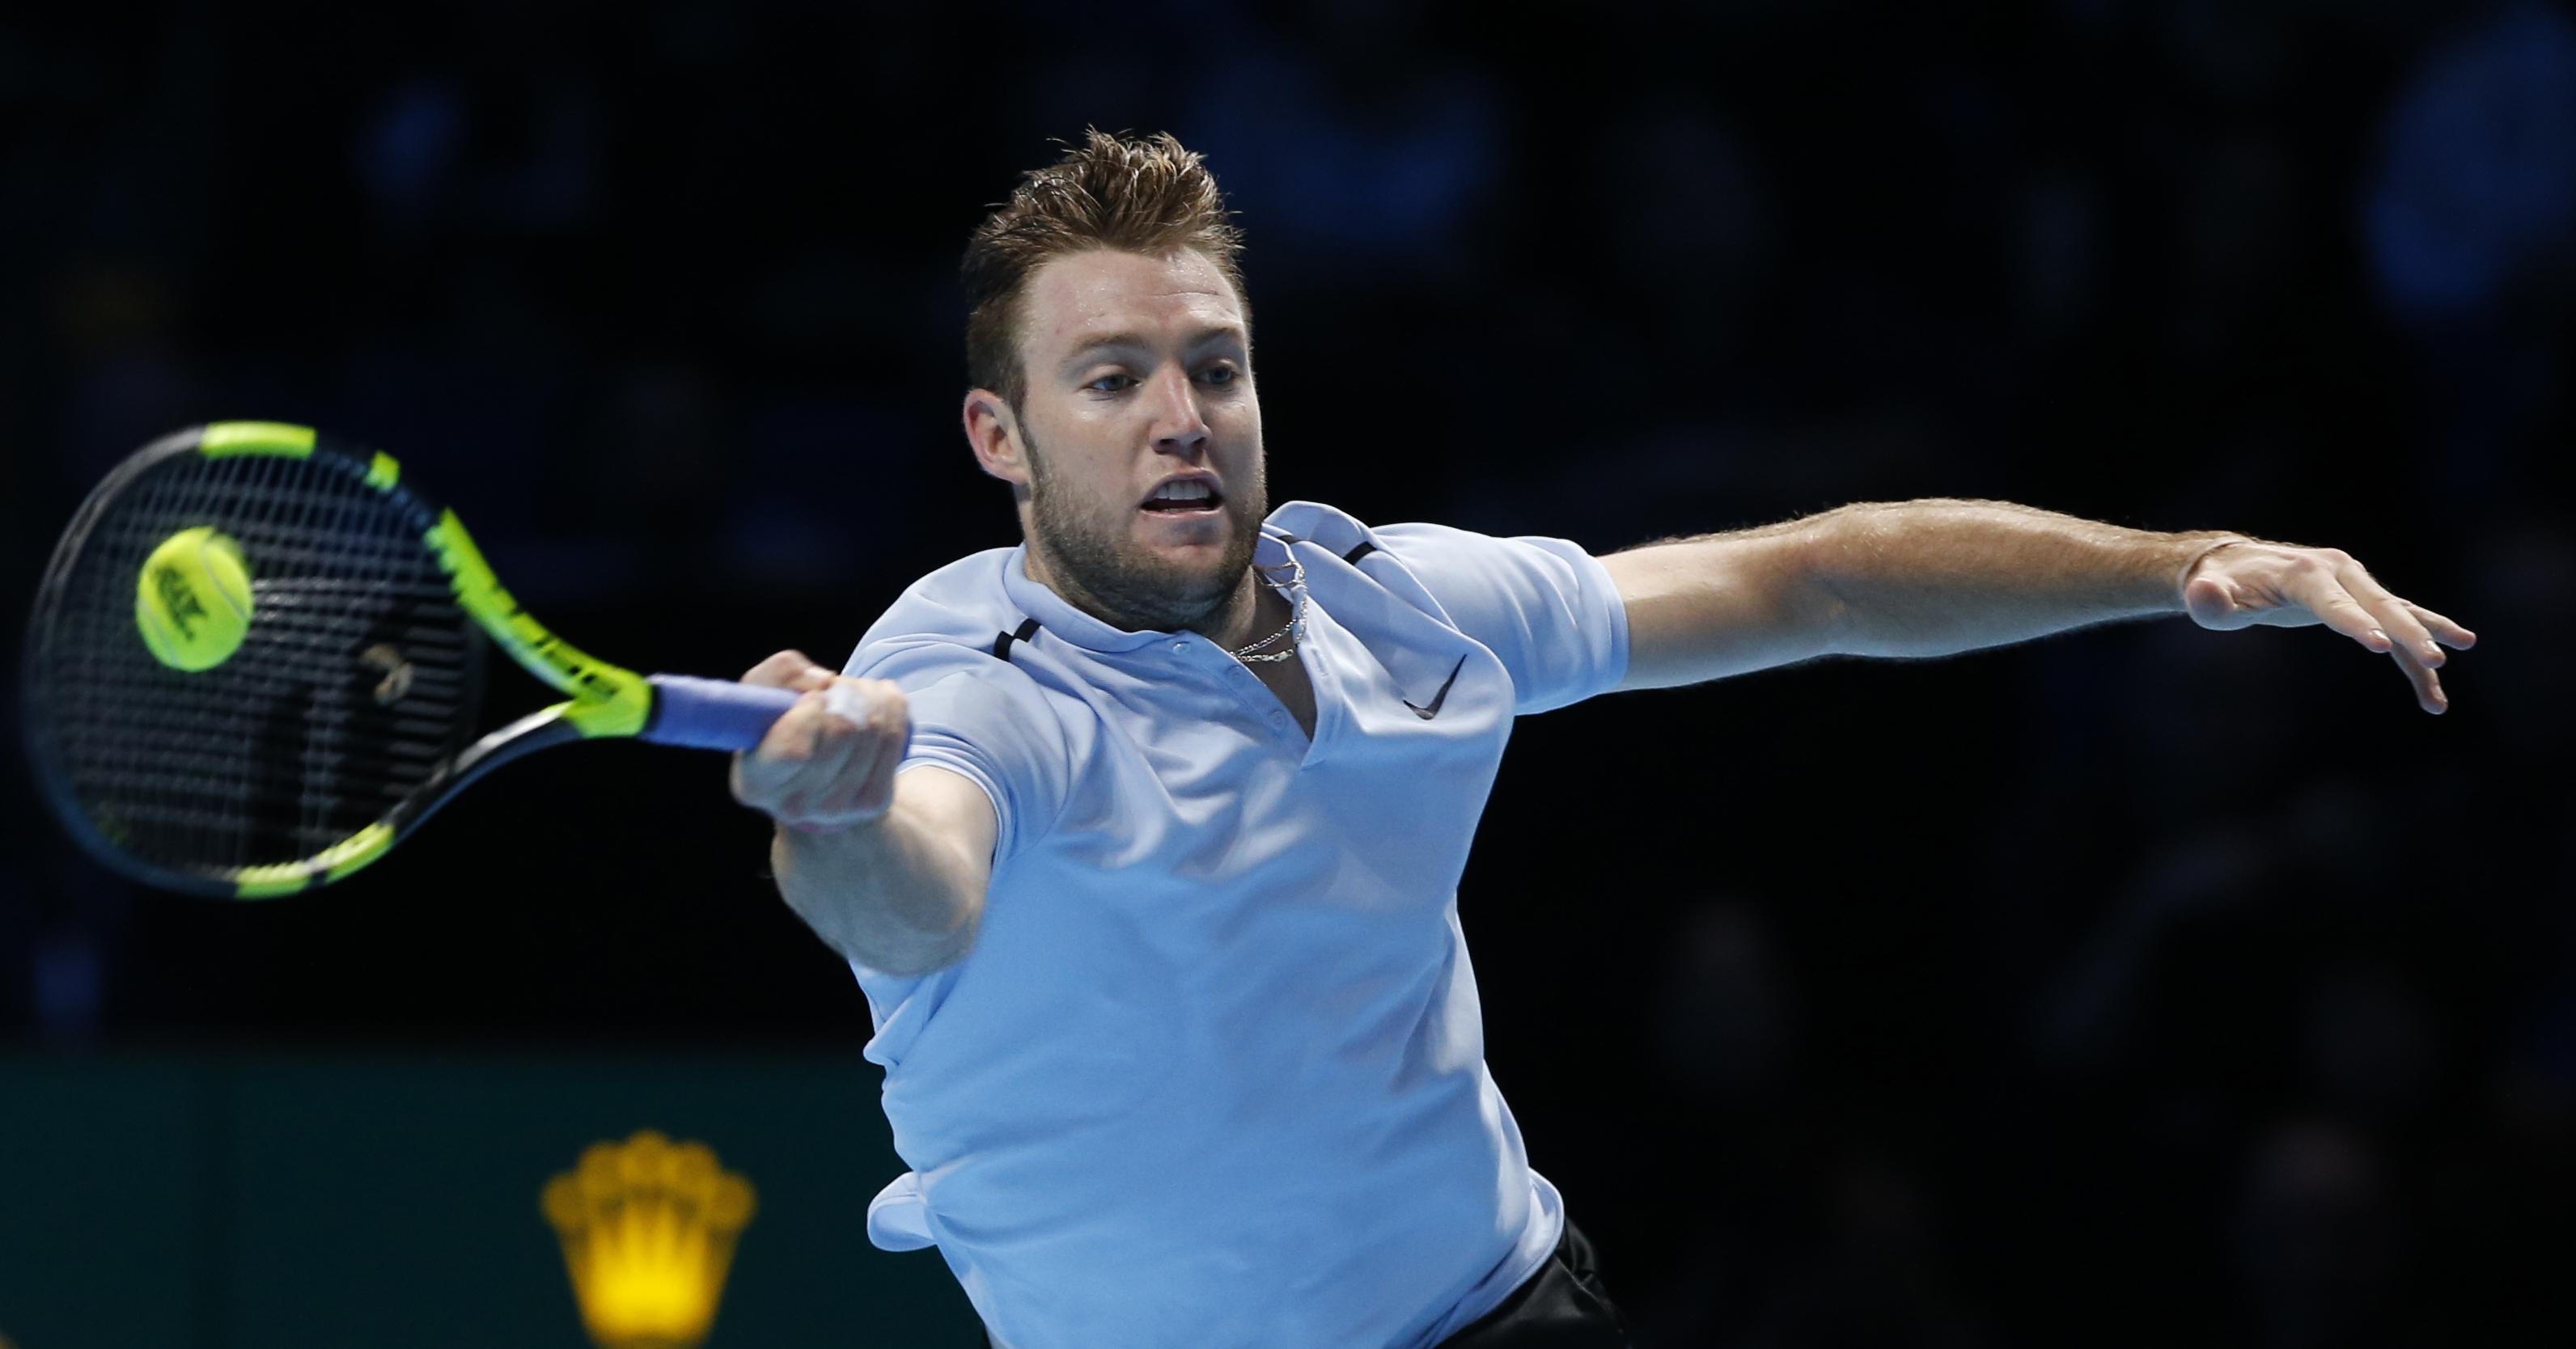 Jack Sock advances with Roger Federer to semifinals at ATP Finals | The Spokesman-Review